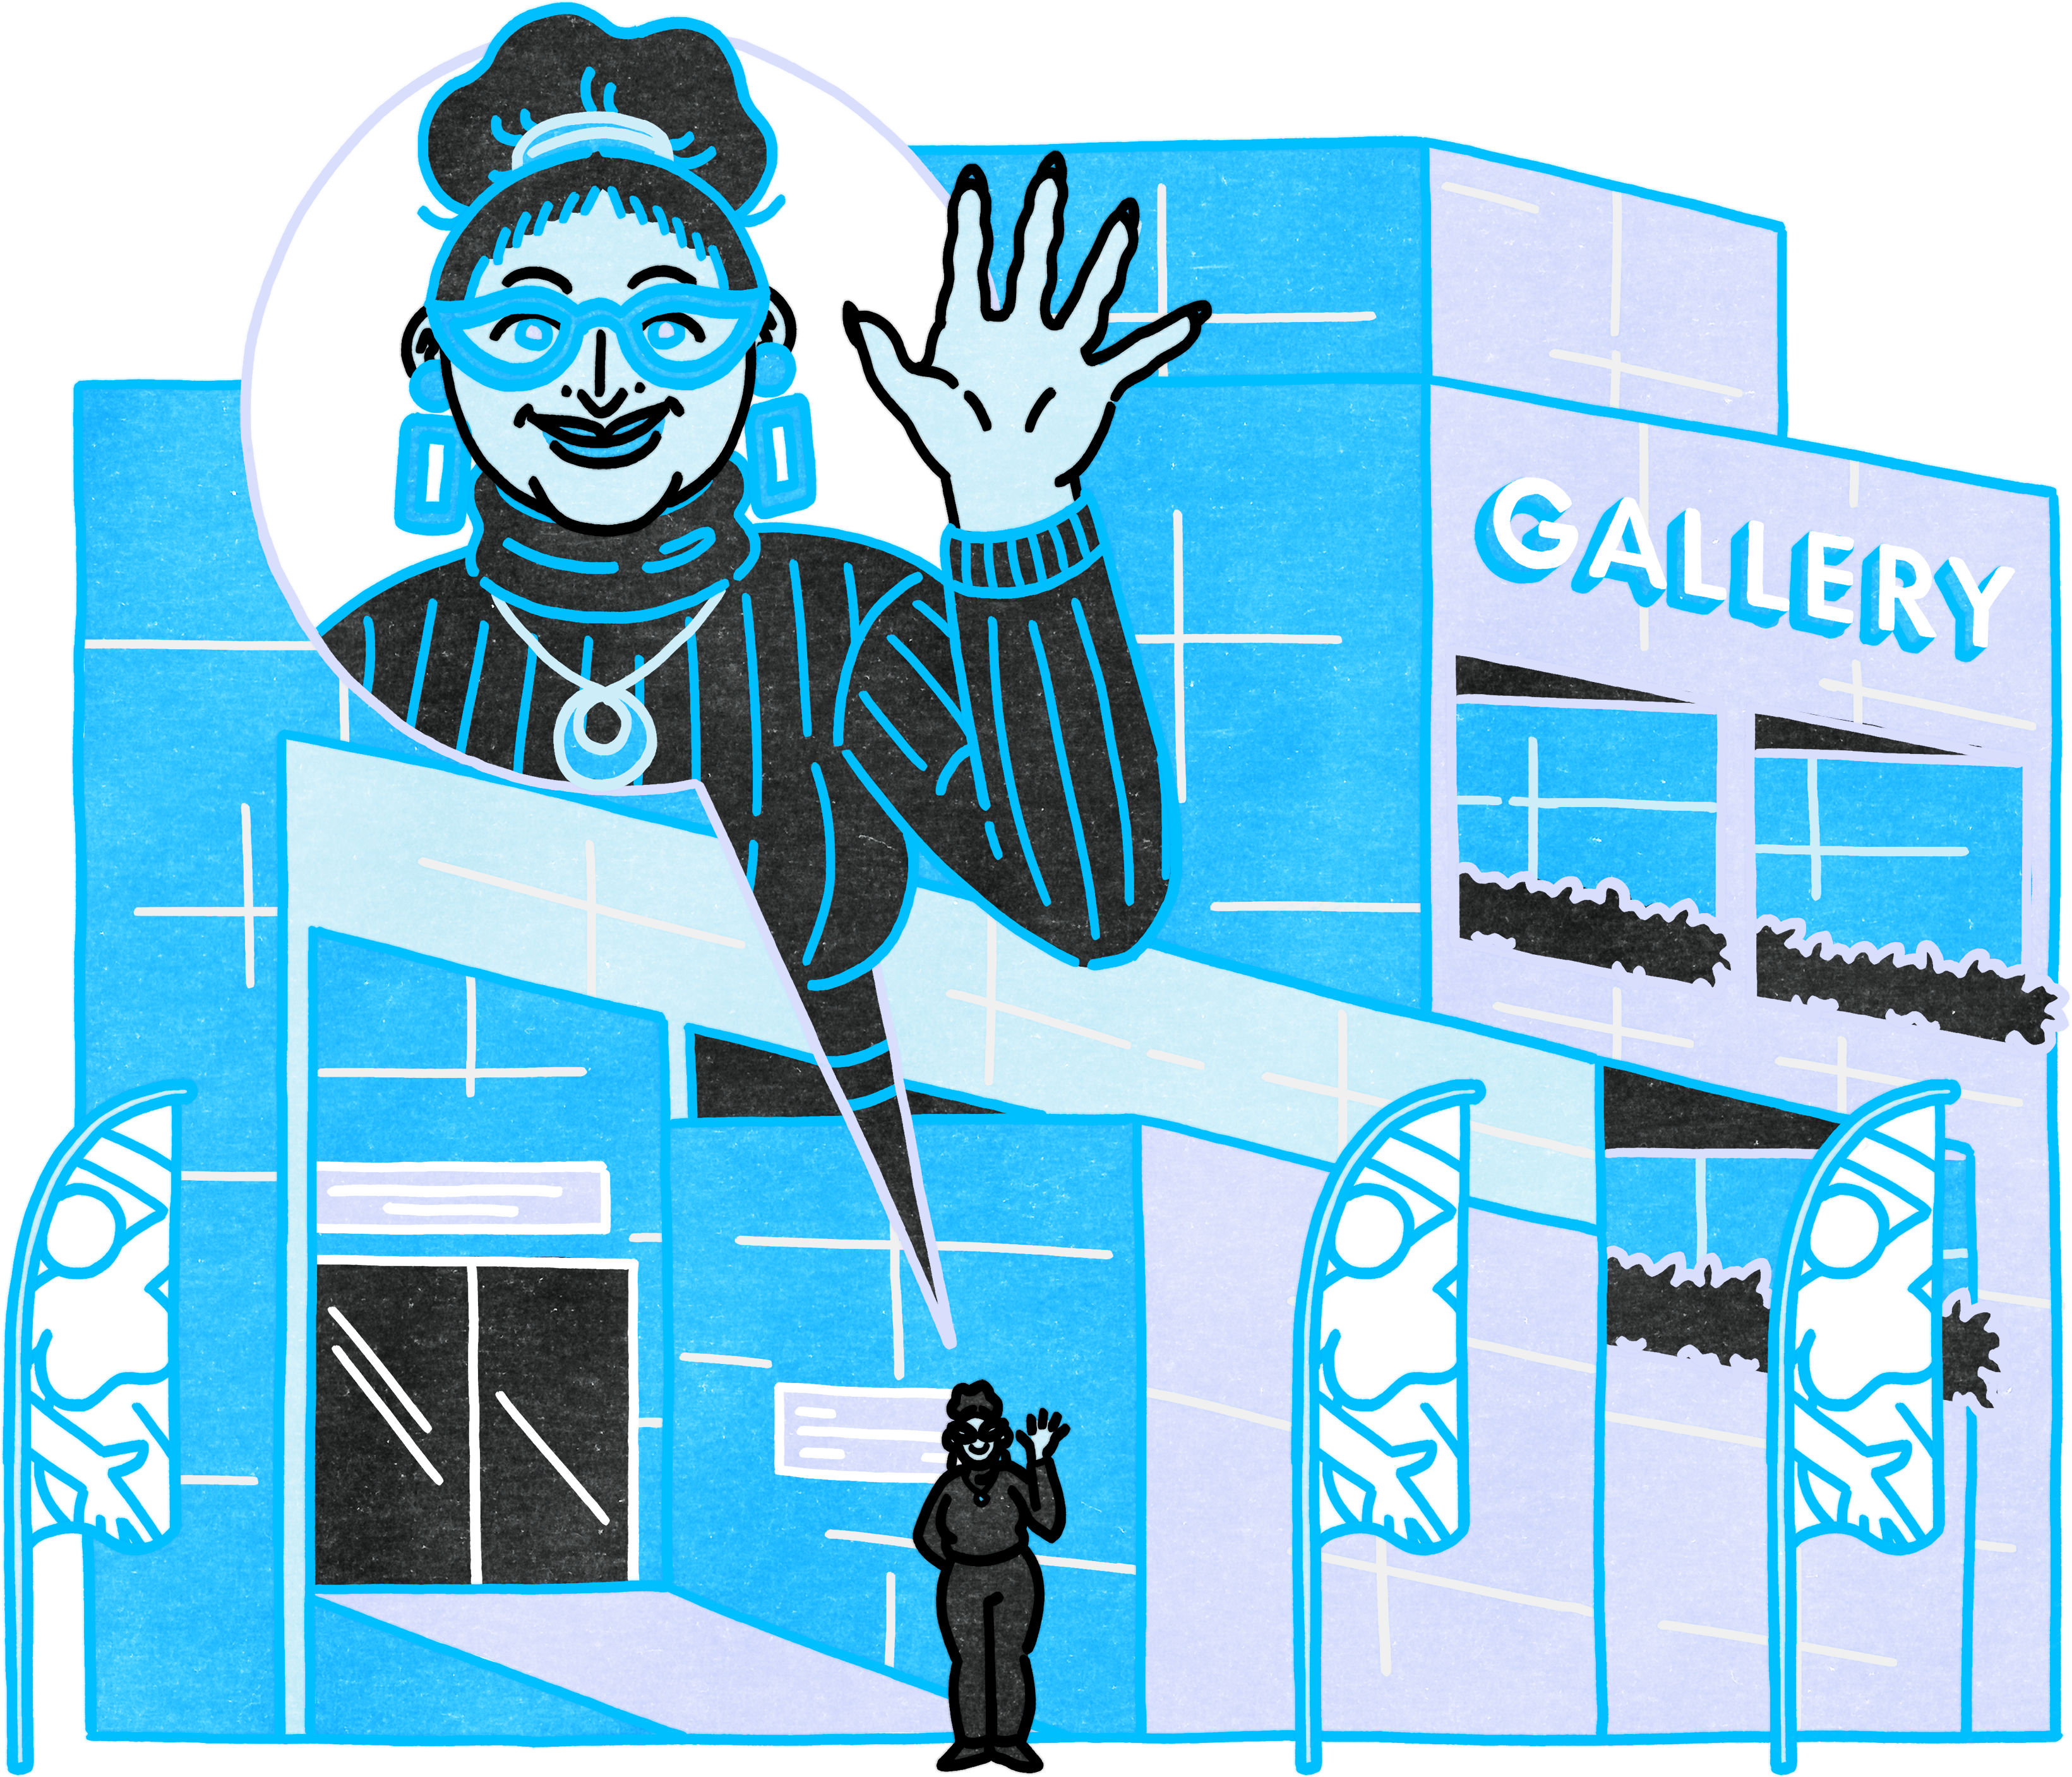 A graphic illustration in shades of blue and purple of a large gallery. There are flags out front showing a figure. The person in front is smiling and waving.